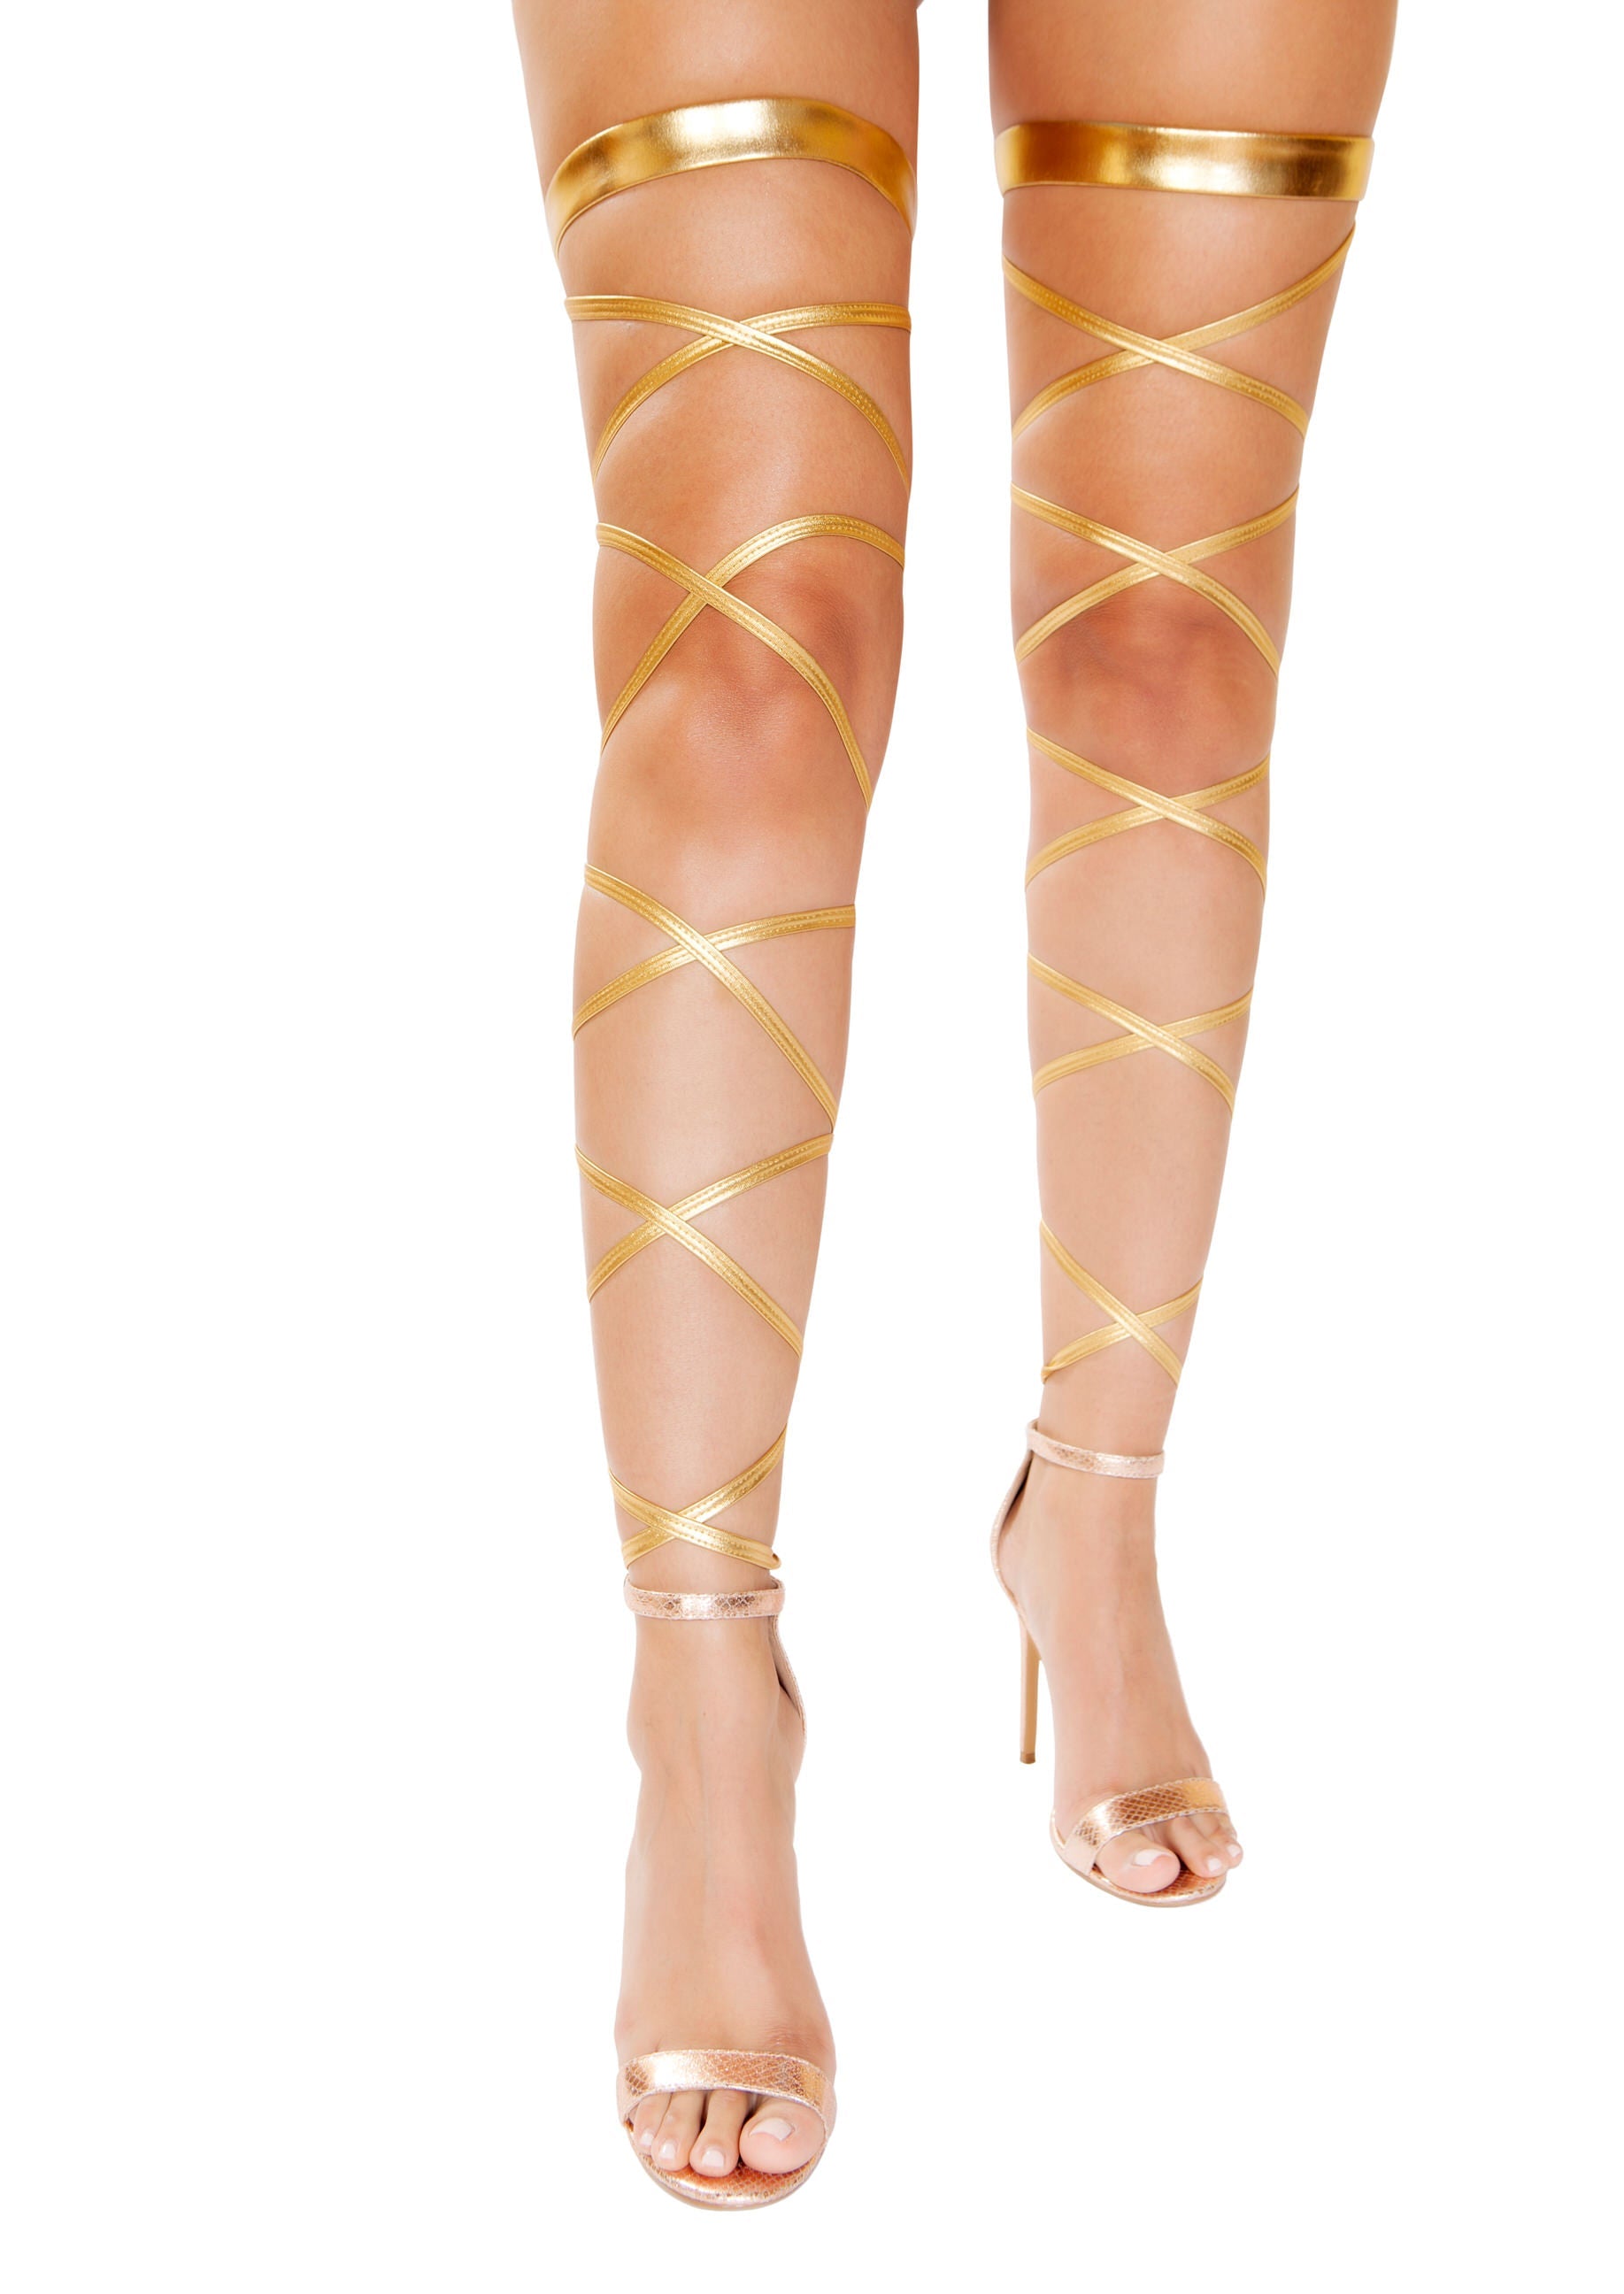 Gold Leg Wraps with Garters - 4929